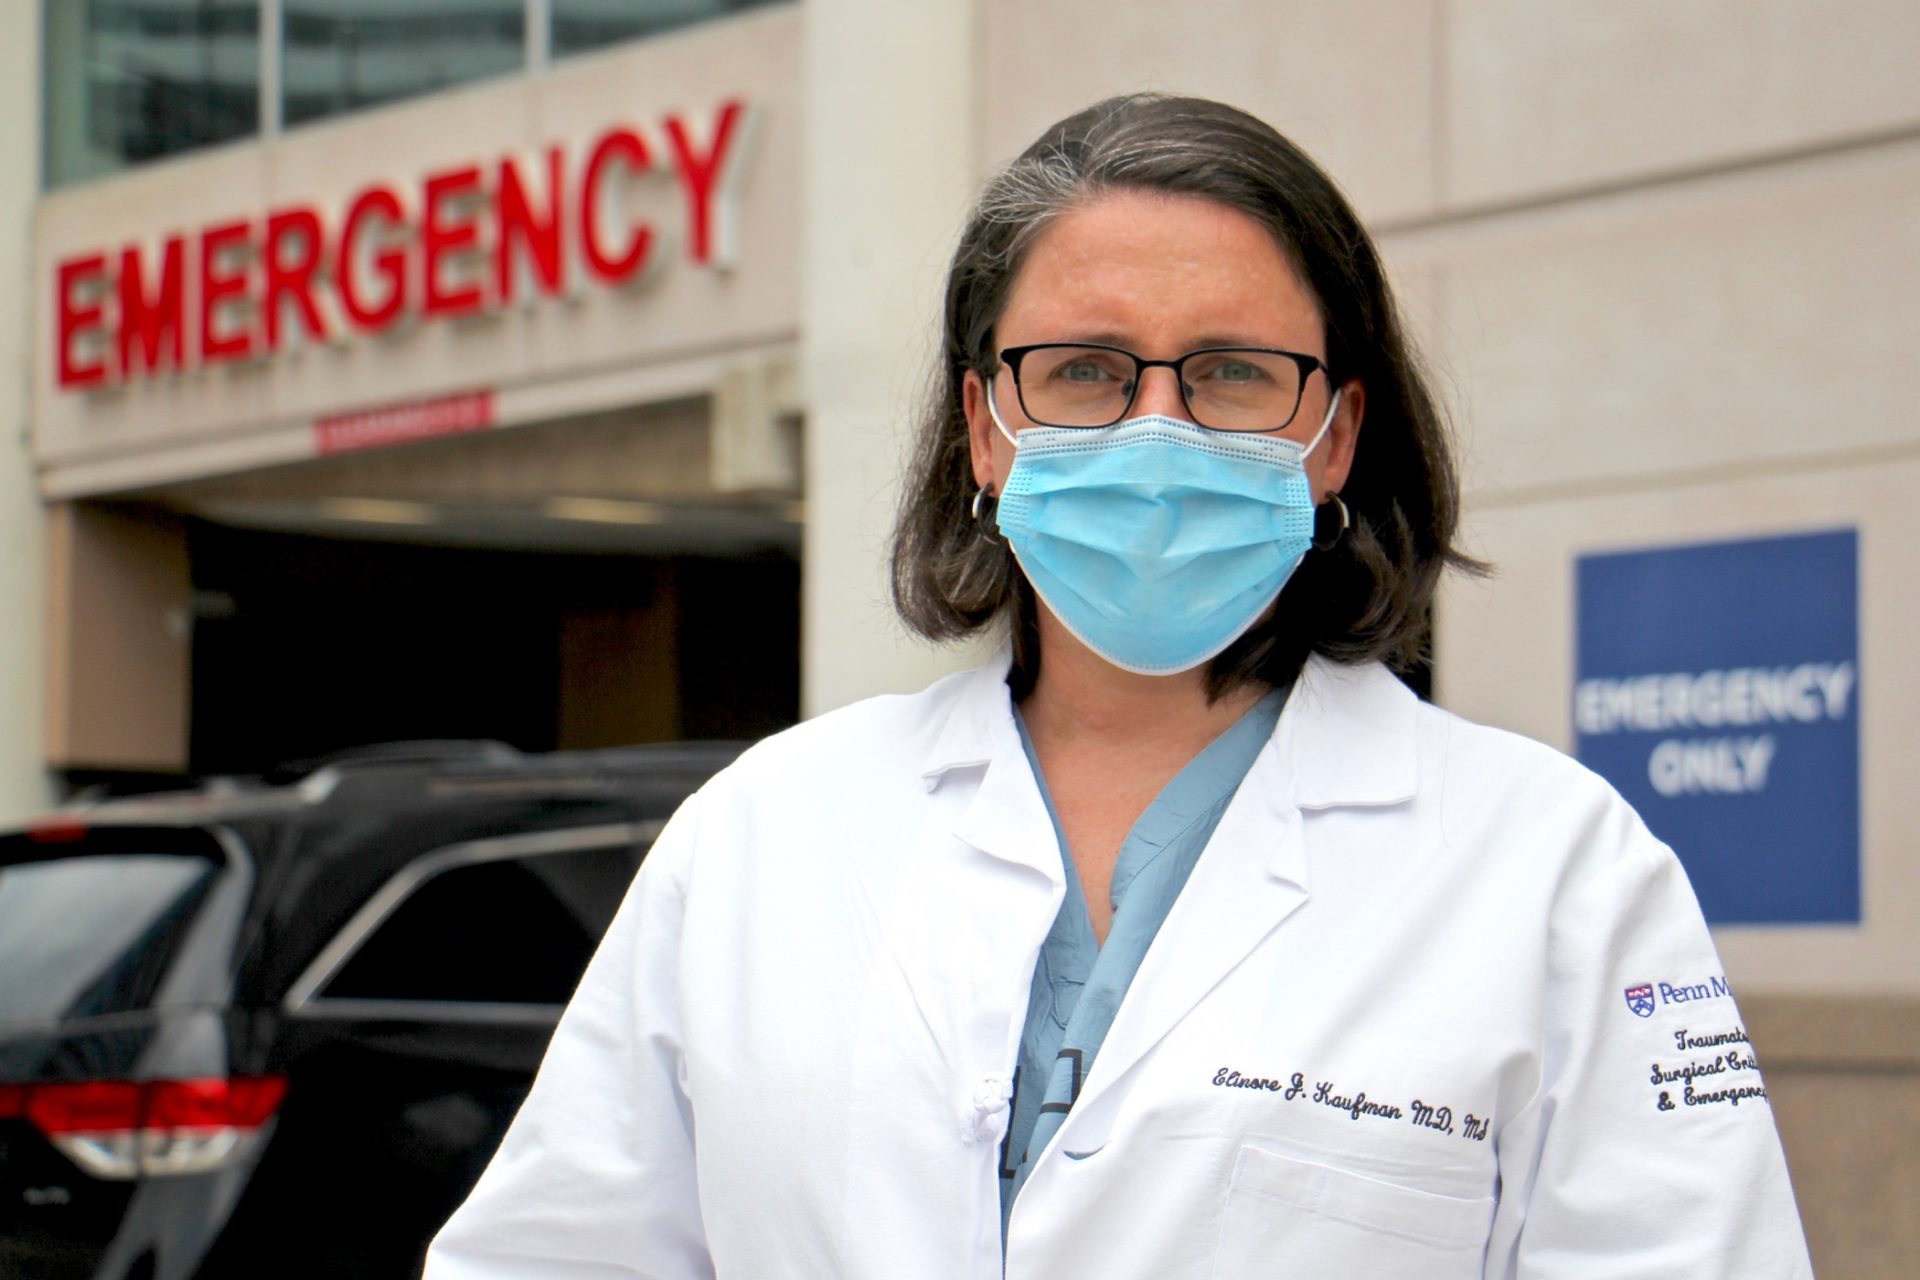 Dr. Elinore Kaufman, a trauma physician at Penn Presbyterian Medical Center, has been contending with two deadly epidemics at the same time: COVID-19 and gun violence.